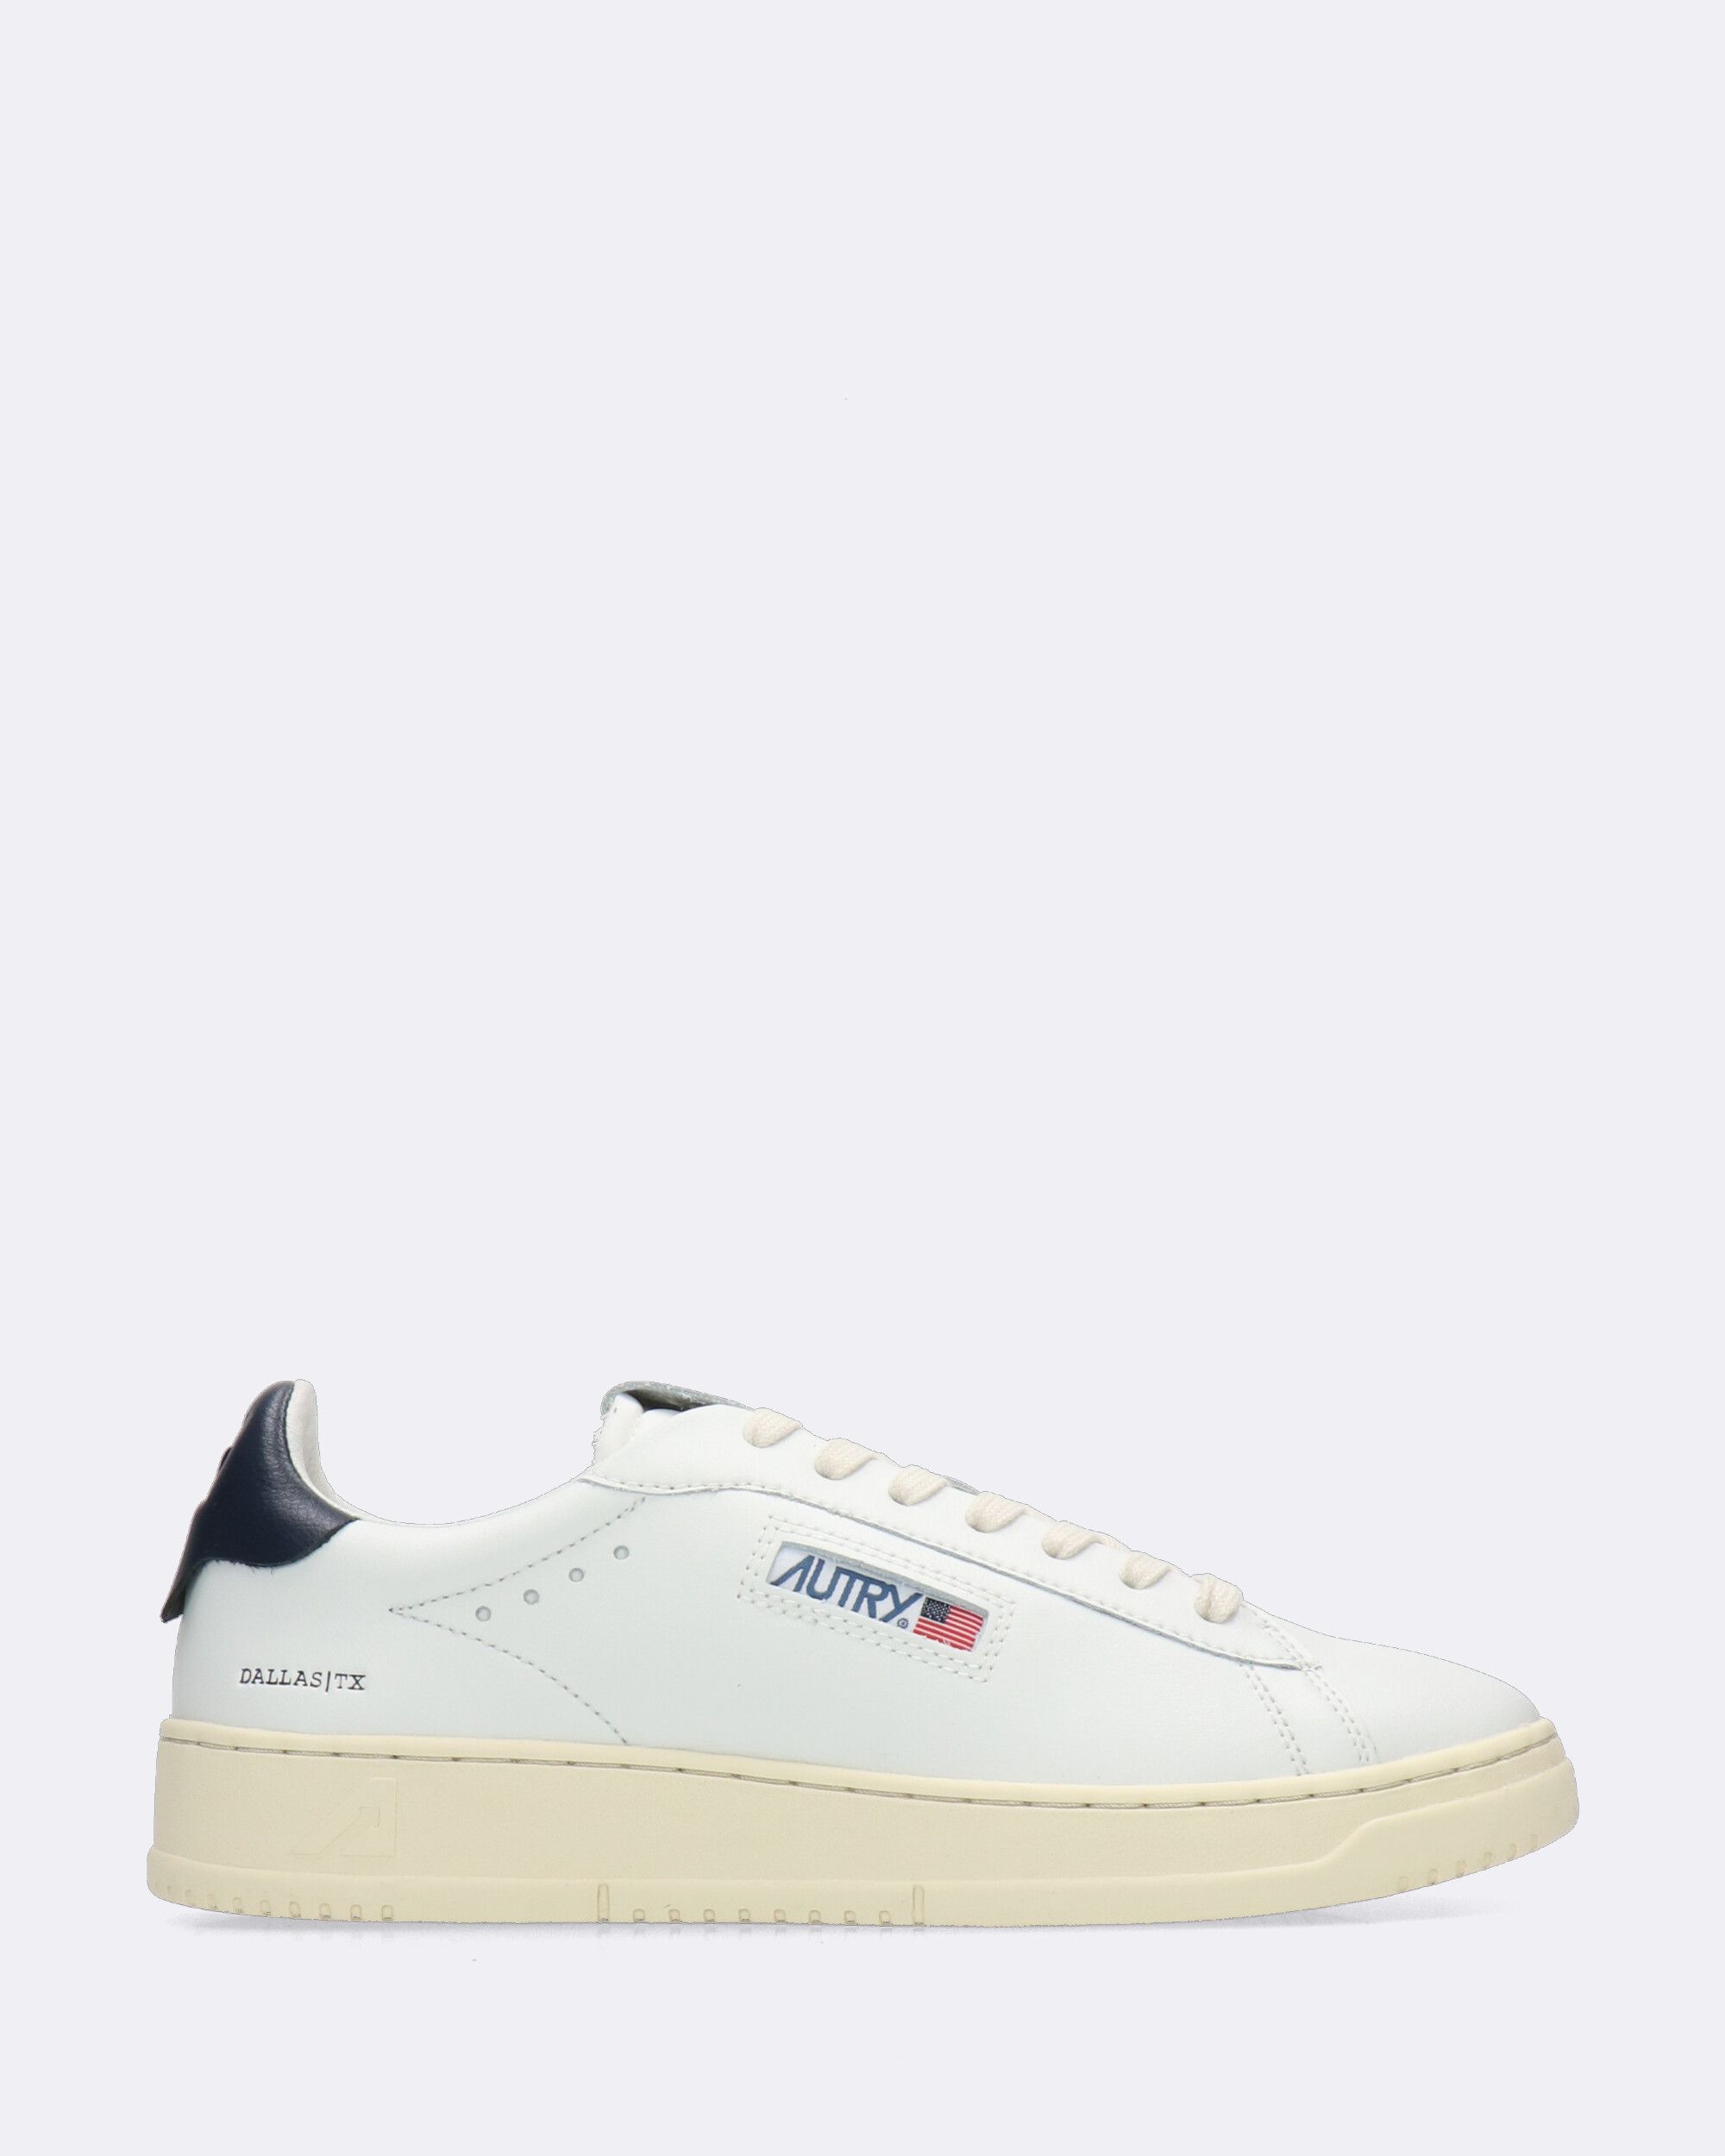 DALLAS LOW MAN LEATHER LEATHER ALL WHITE